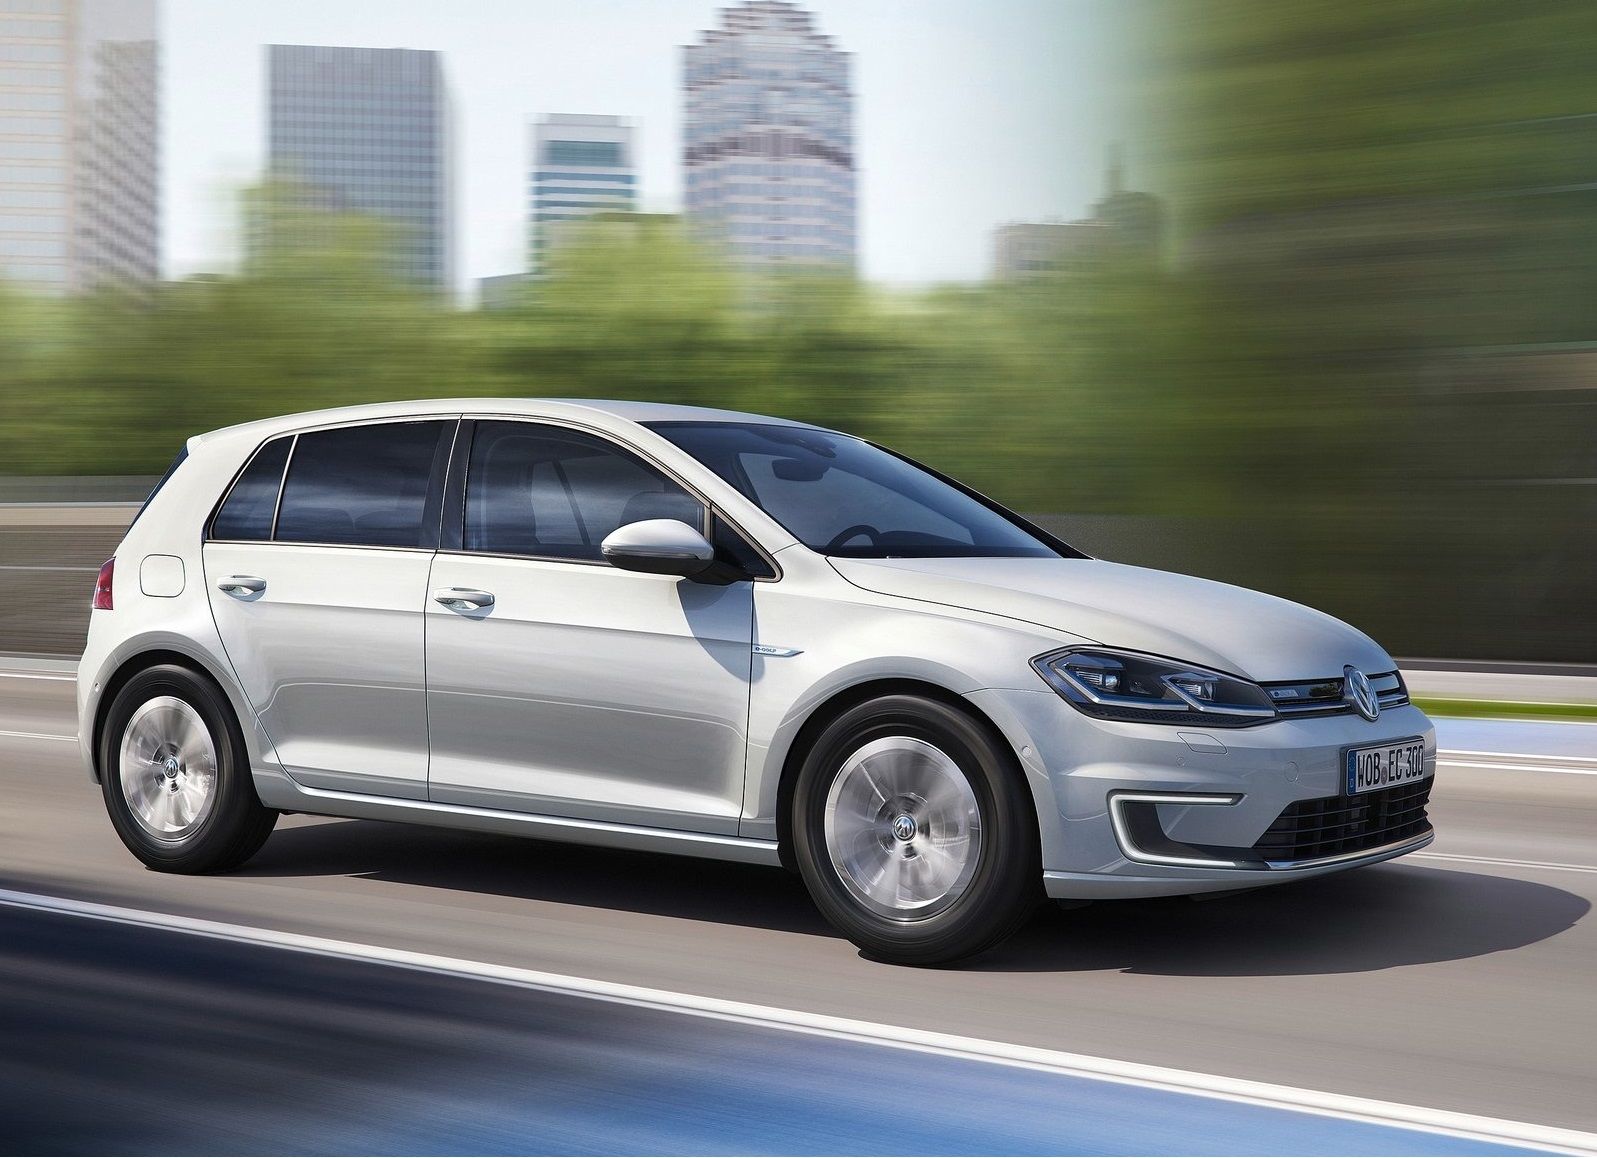 The 2017 Volkswagen e-Golf will be available at VW Lauzon Blainville in June 2017!